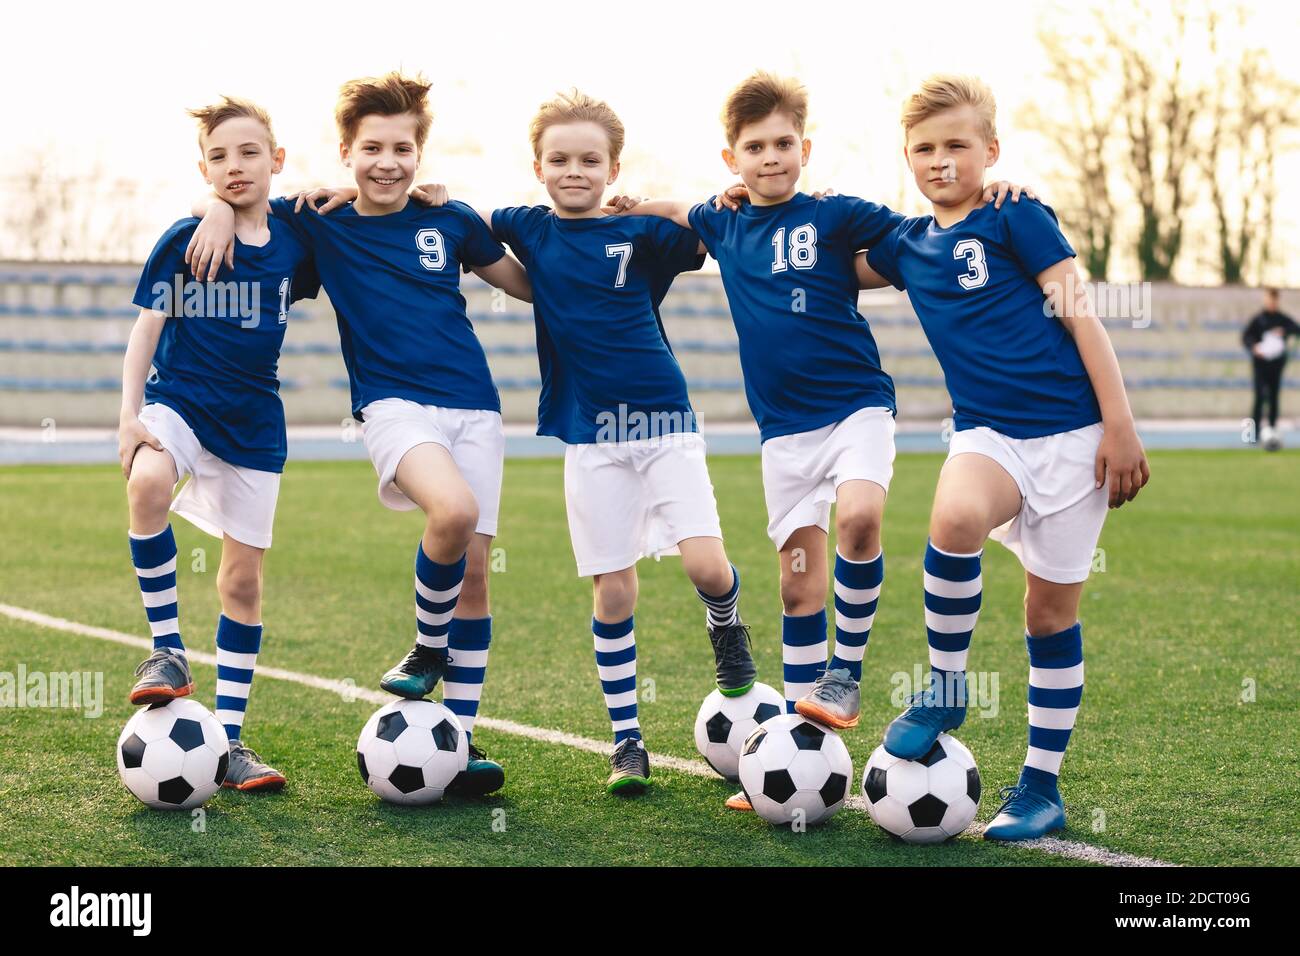 Sporty School Boys in Soccer Team. Group of Children in Football Jersey Sportswear Standing with Balls on Grass Pitch. Happy Smiling Kids in Sport Tea Stock Photo